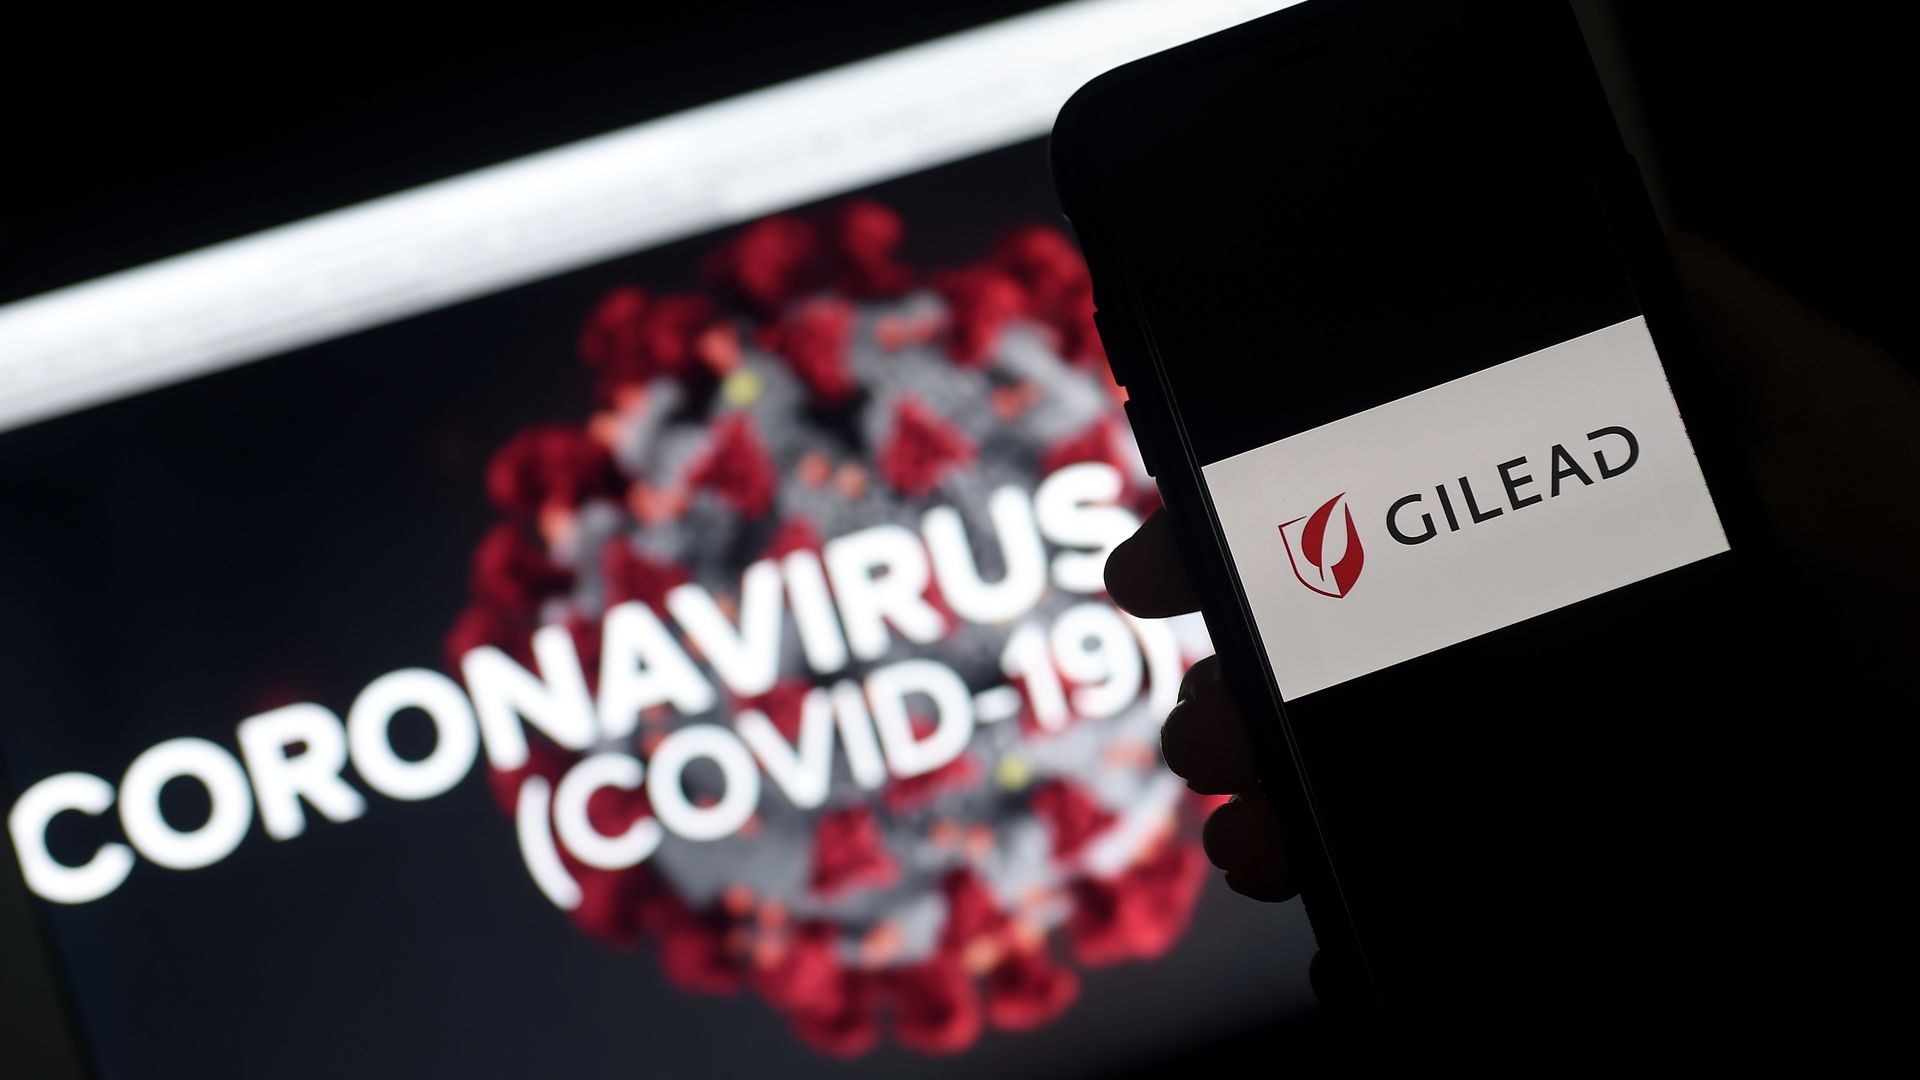 Gilead logo is displayed on a smartphone next to a screen showing a coronavirus graphic on March 25